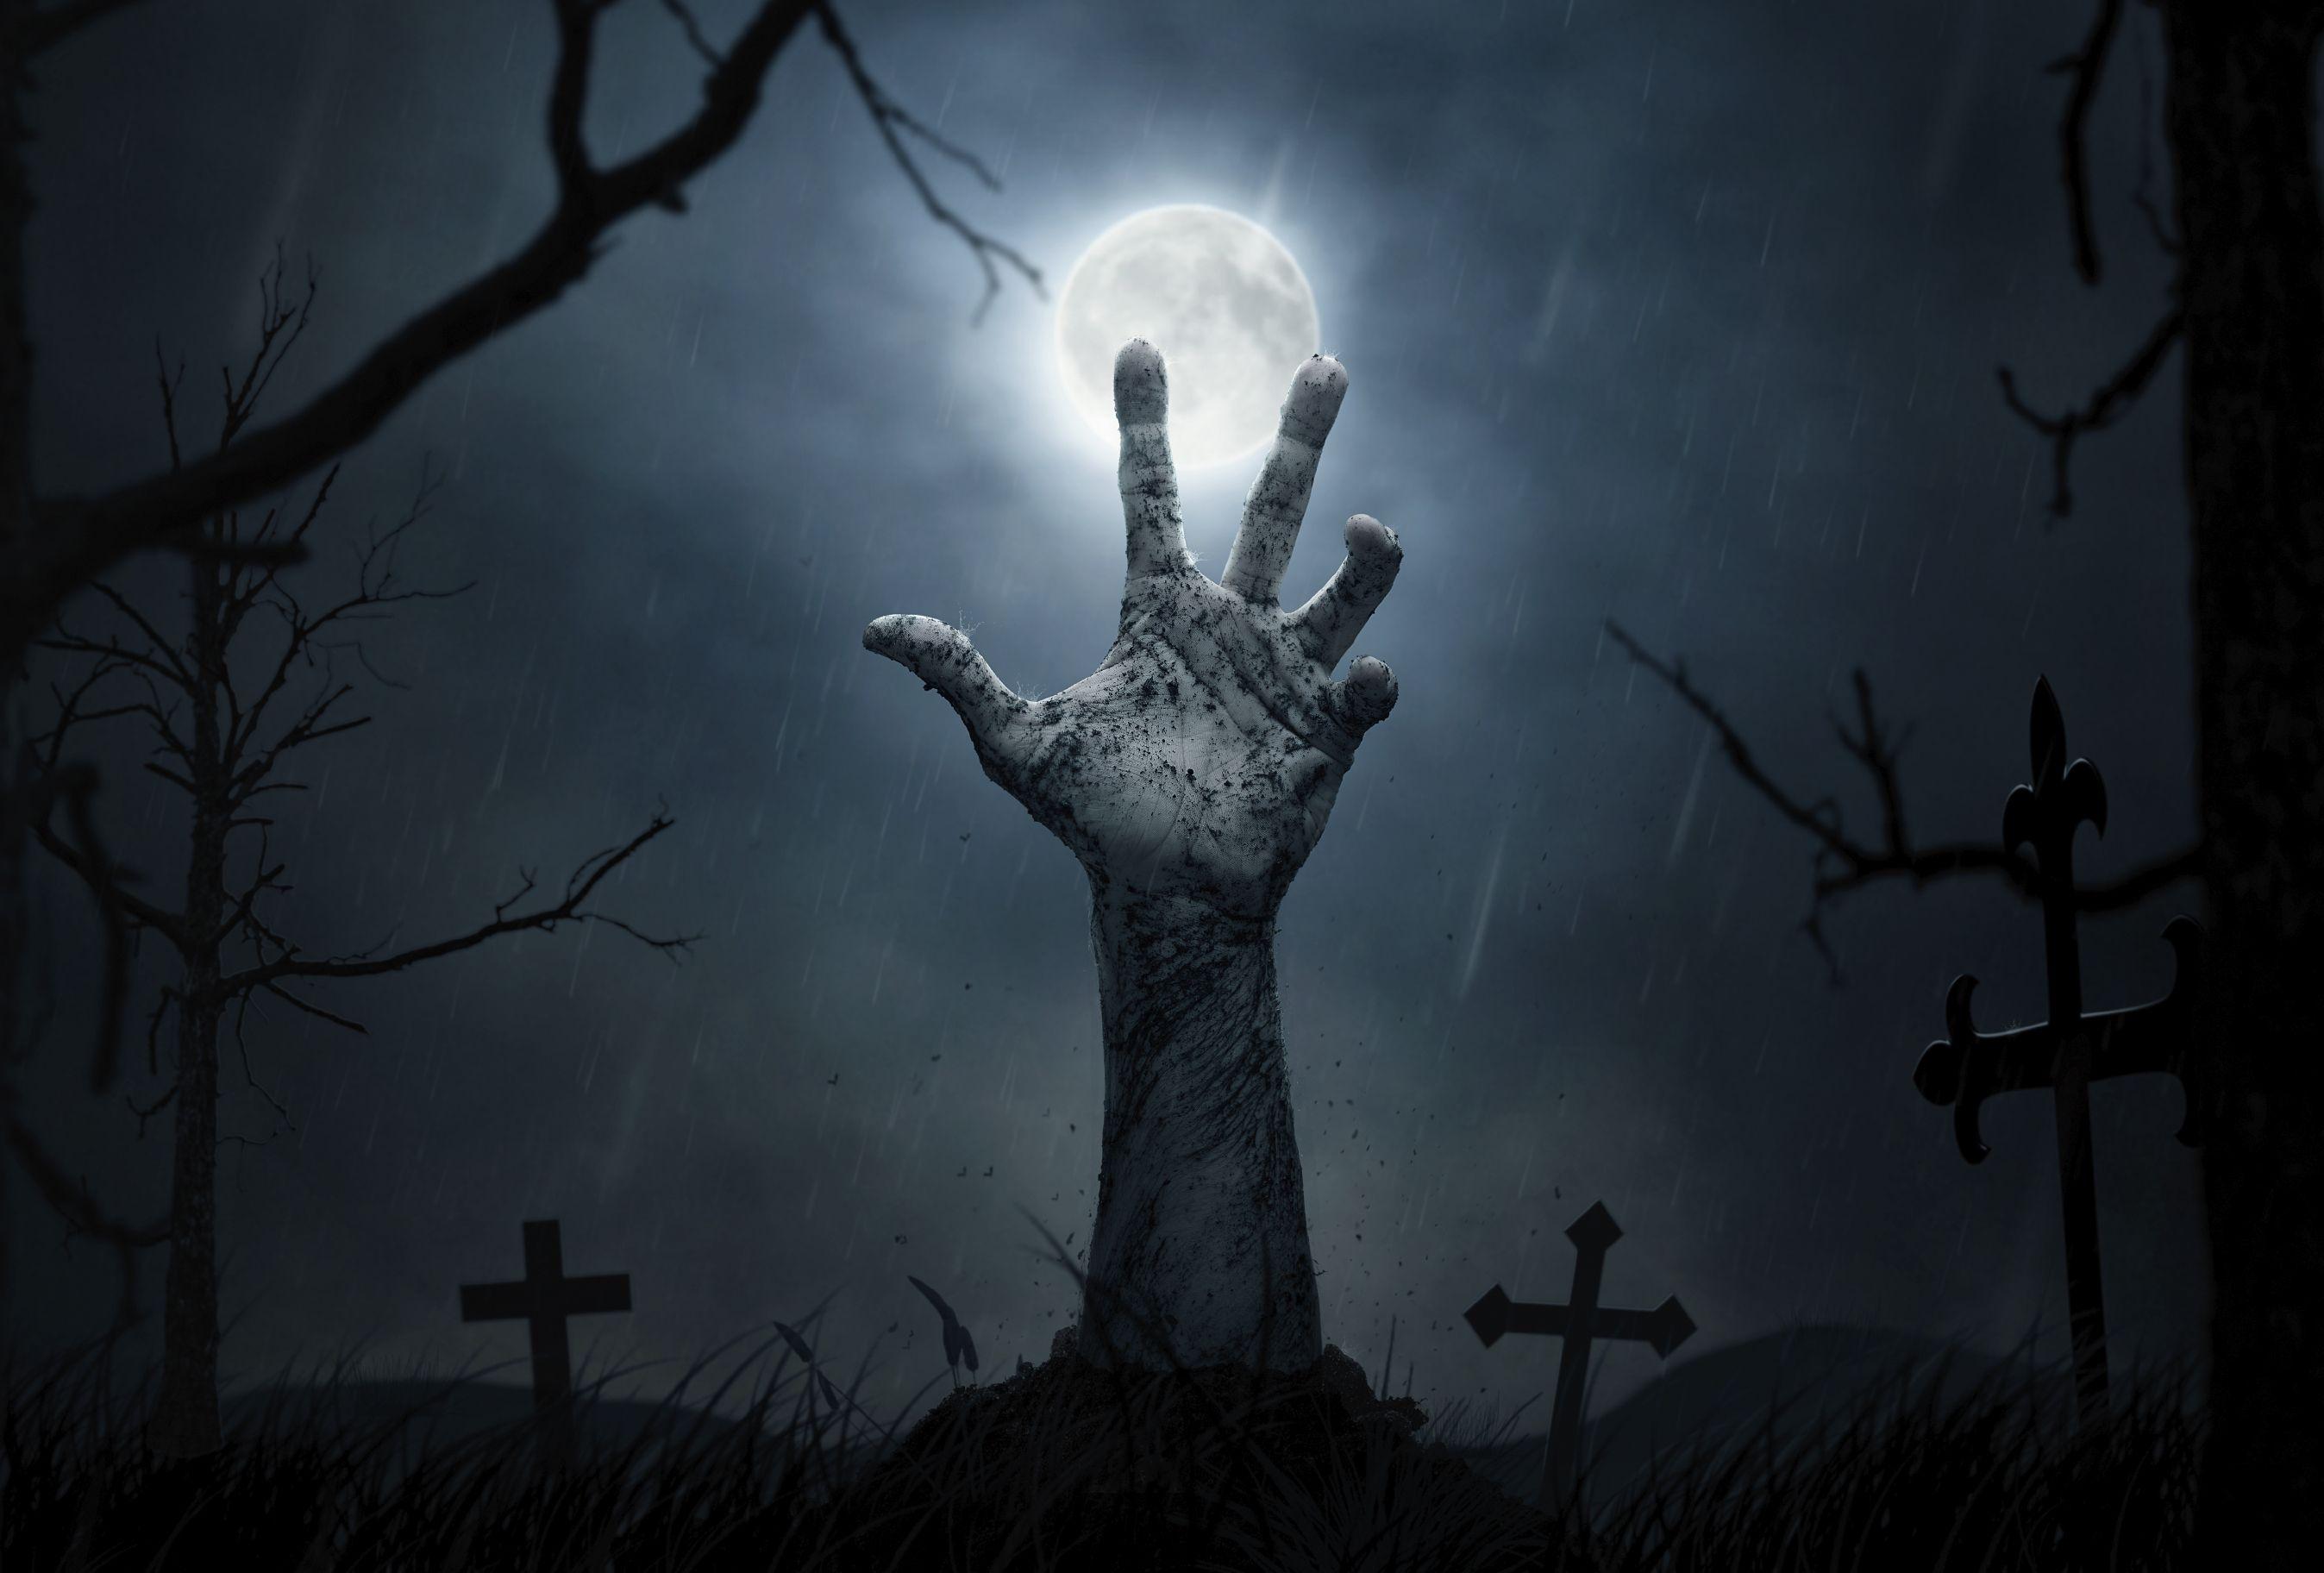 Dark Cemetery At Night To Be Used In The Dark Virtual Reality Background  3d Rendering Halloween Background With Graveyard In A Spooky Night Hd  Photography Photo Background Image And Wallpaper for Free